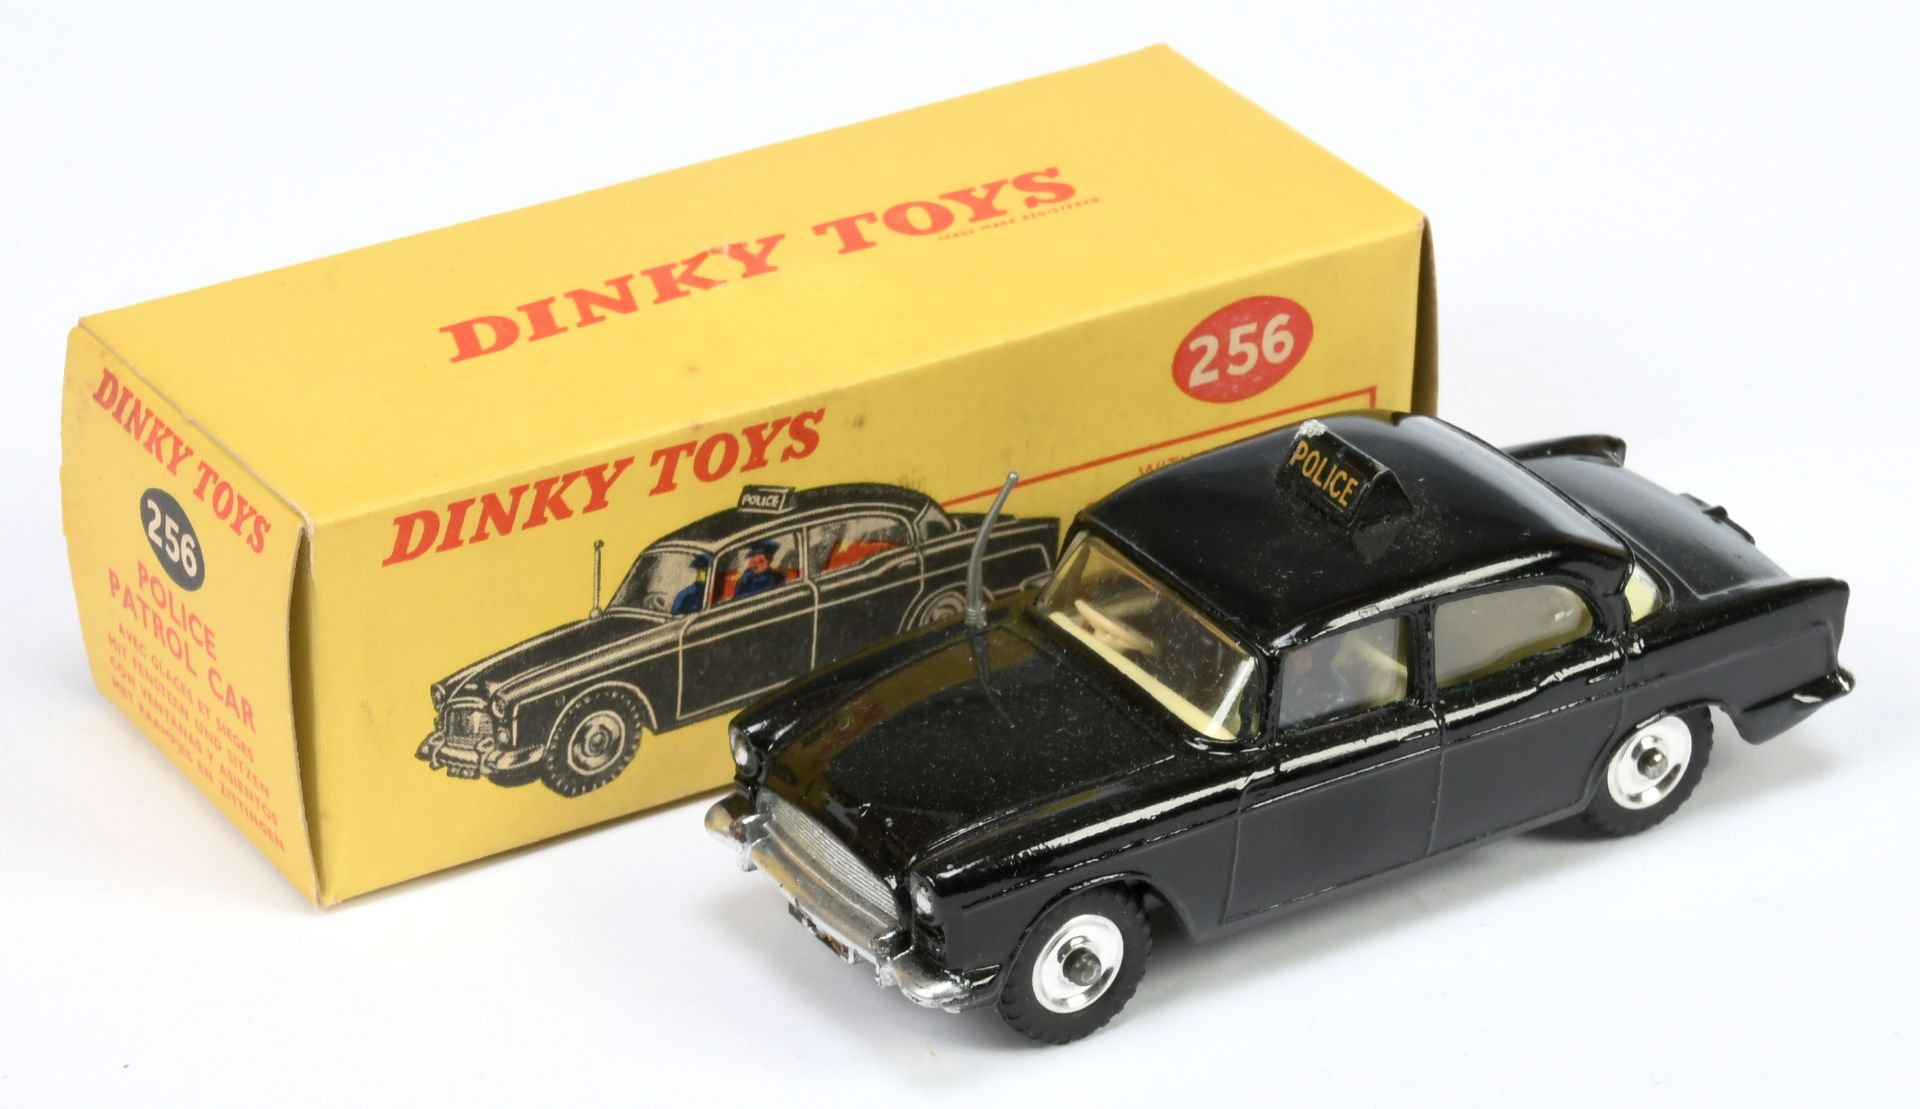 Dinky 256 Humber hawk "Police" Car - Black body, pale cream interior with figures, silver trim, s...